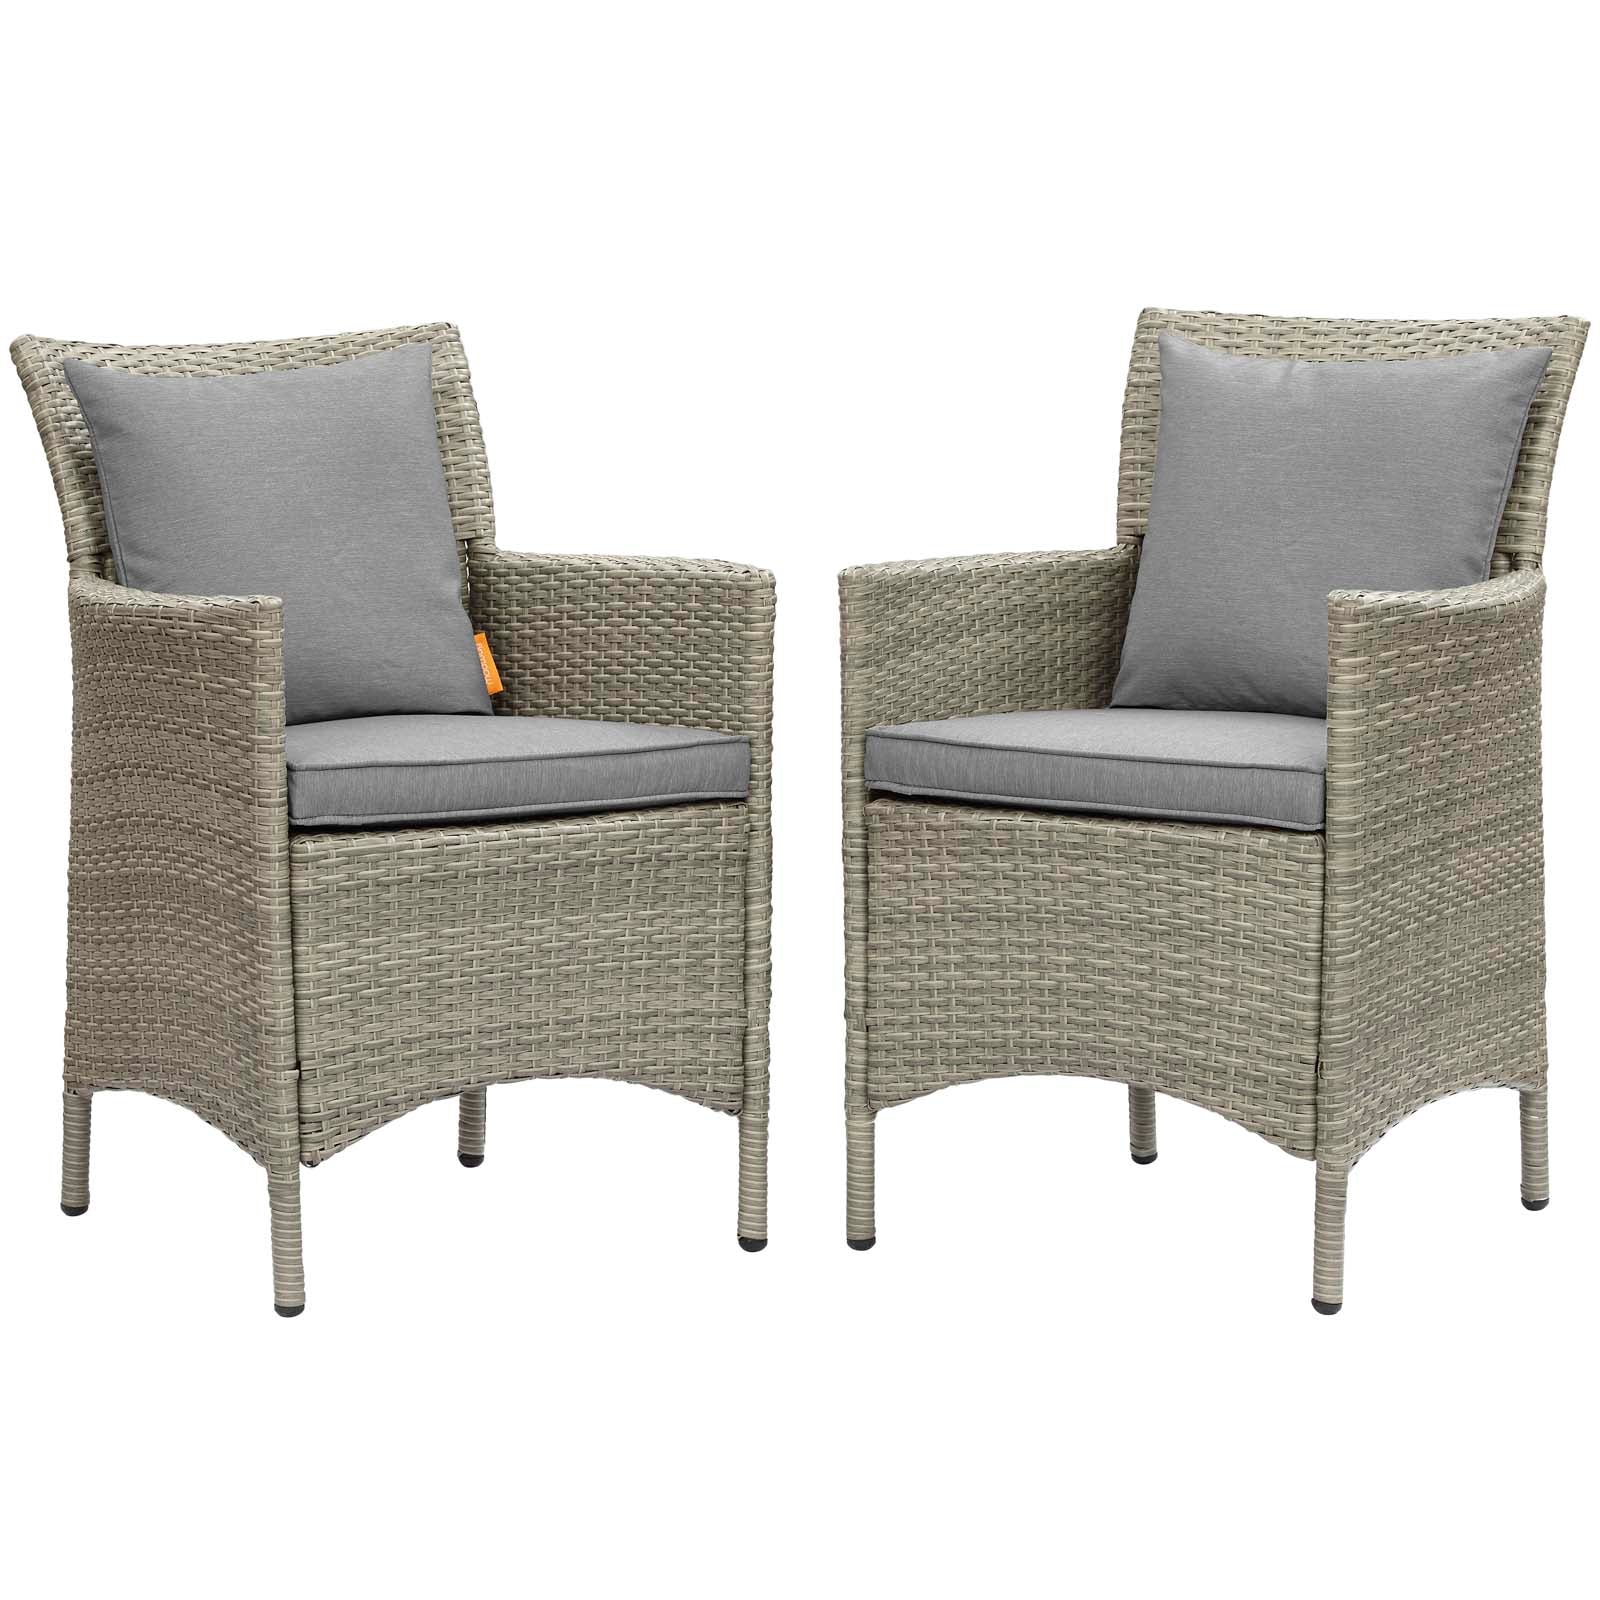 Modway Outdoor Dining Chairs - Conduit Outdoor Patio Wicker Rattan Dining Armchair (Set of 2) Light Gray